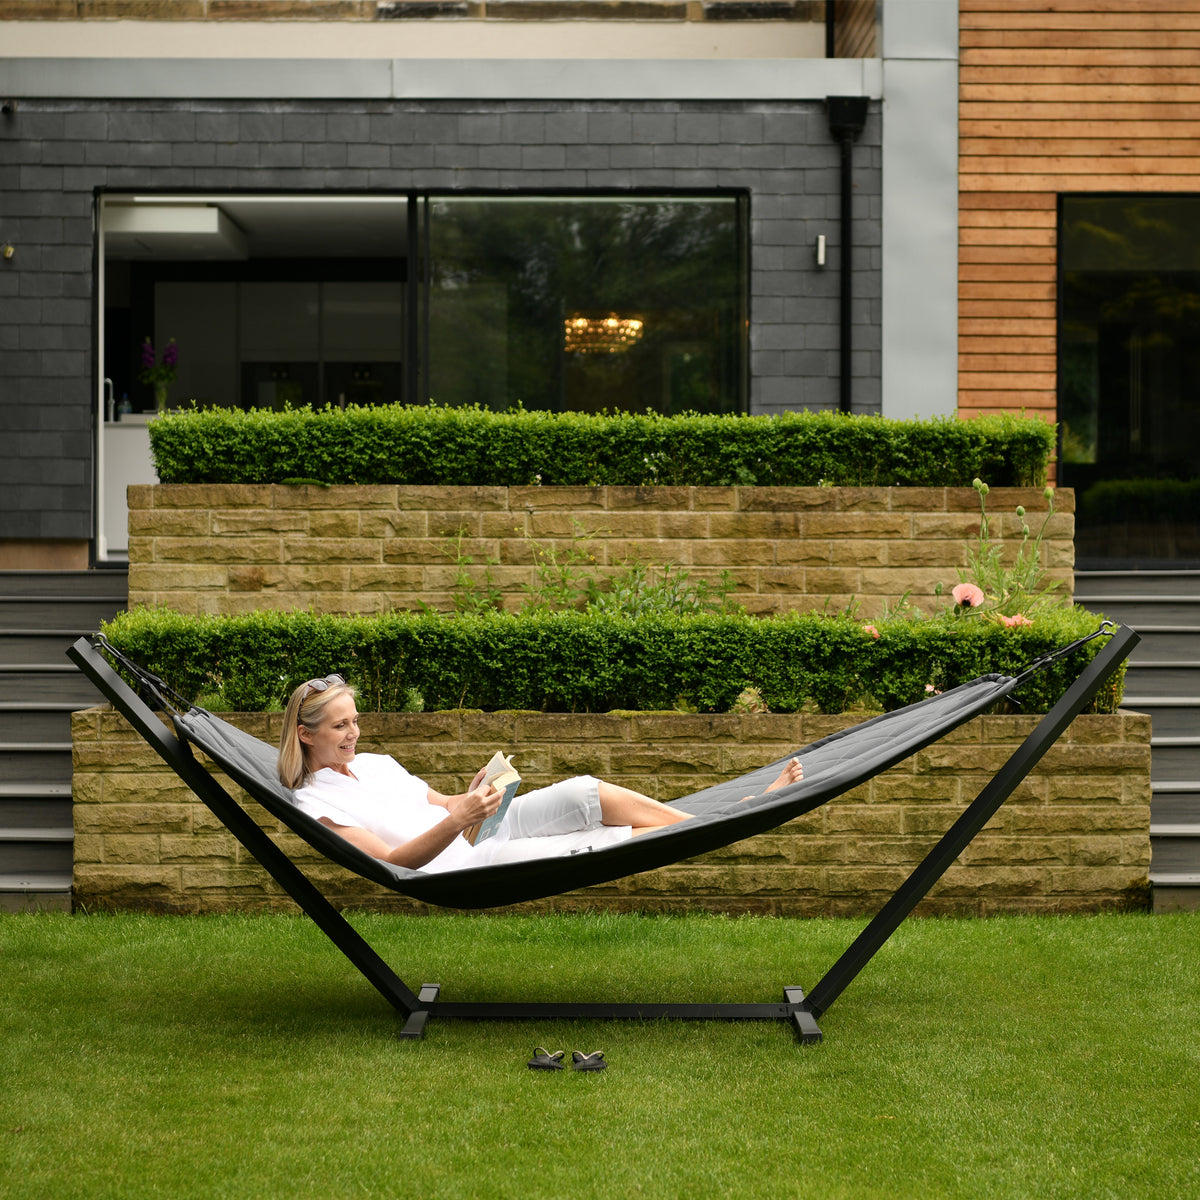 Extreme Lounging Silver B Hammock with Cushion for outdoors